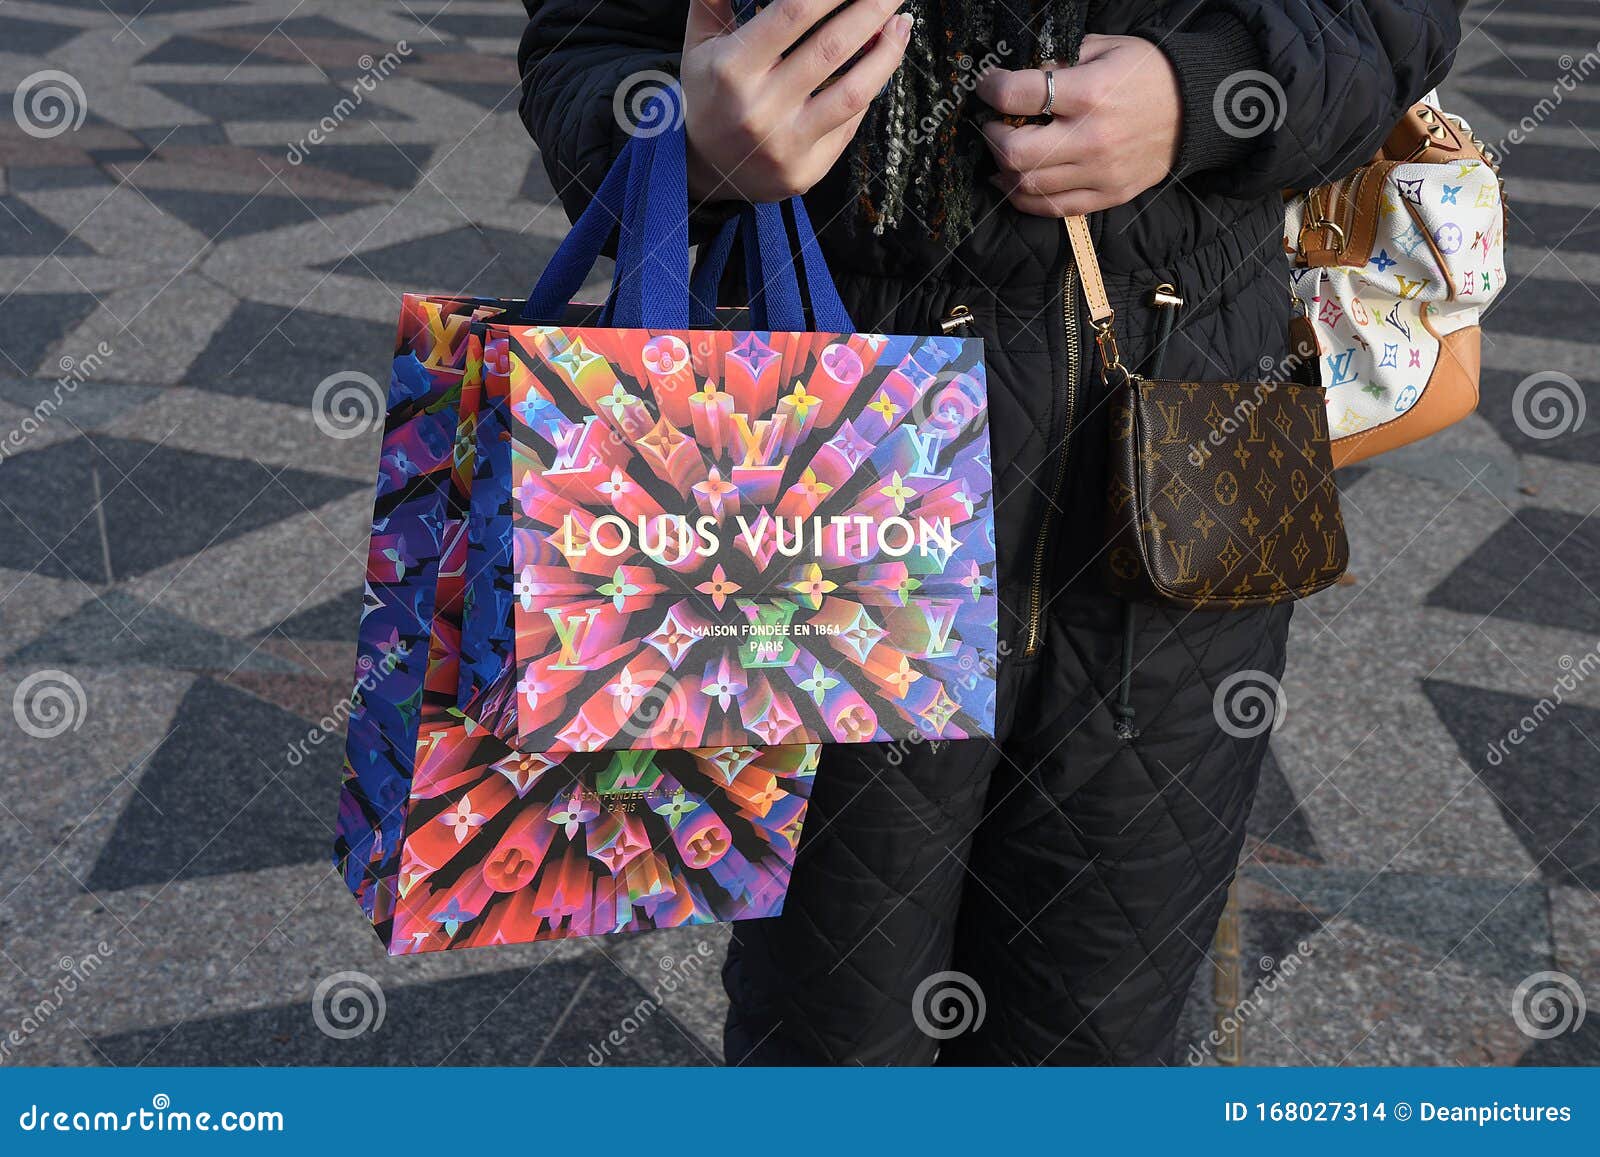 YEAR SHOPPERS and CONSUMERS at LOUIS VUITTON Editorial Stock Image - Image of amage, finance: 168027314